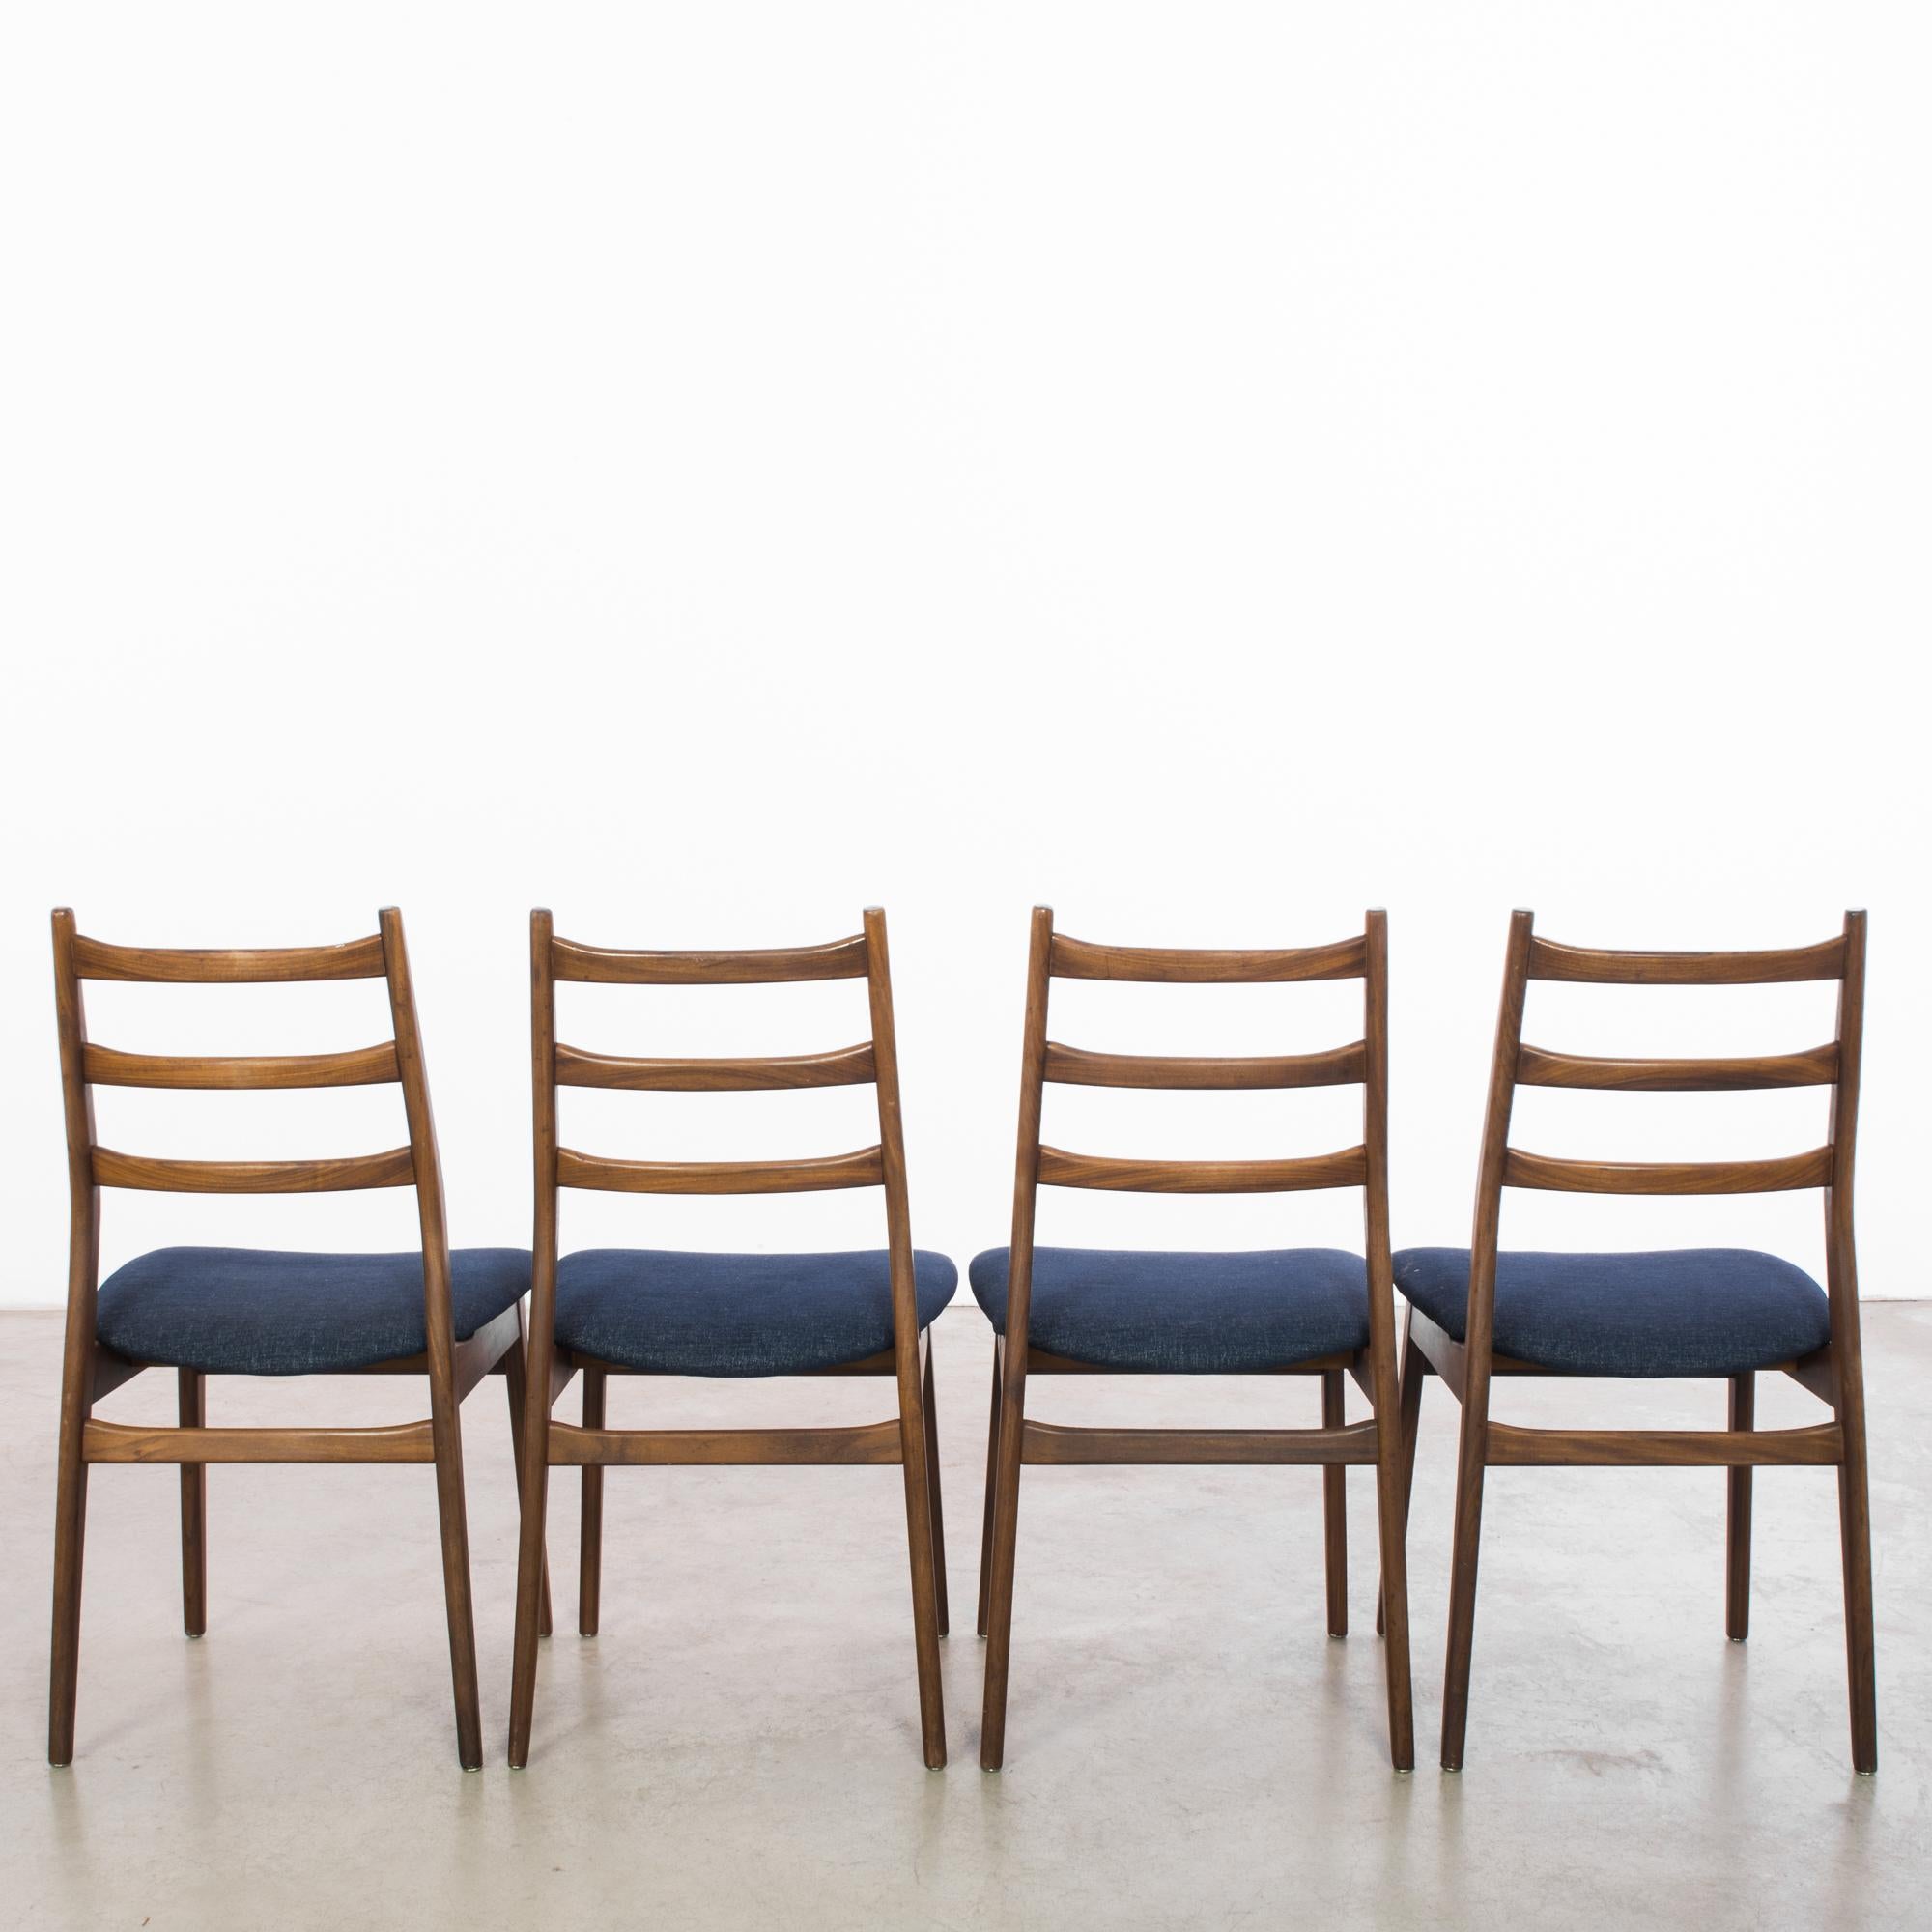 Step into the world of mid-century sophistication with this exquisite set of four 1960s Danish wooden chairs, a perfect blend of functionality and minimalist elegance. The warm teak wood frames exhibit the sleek lines and beautiful grain that are